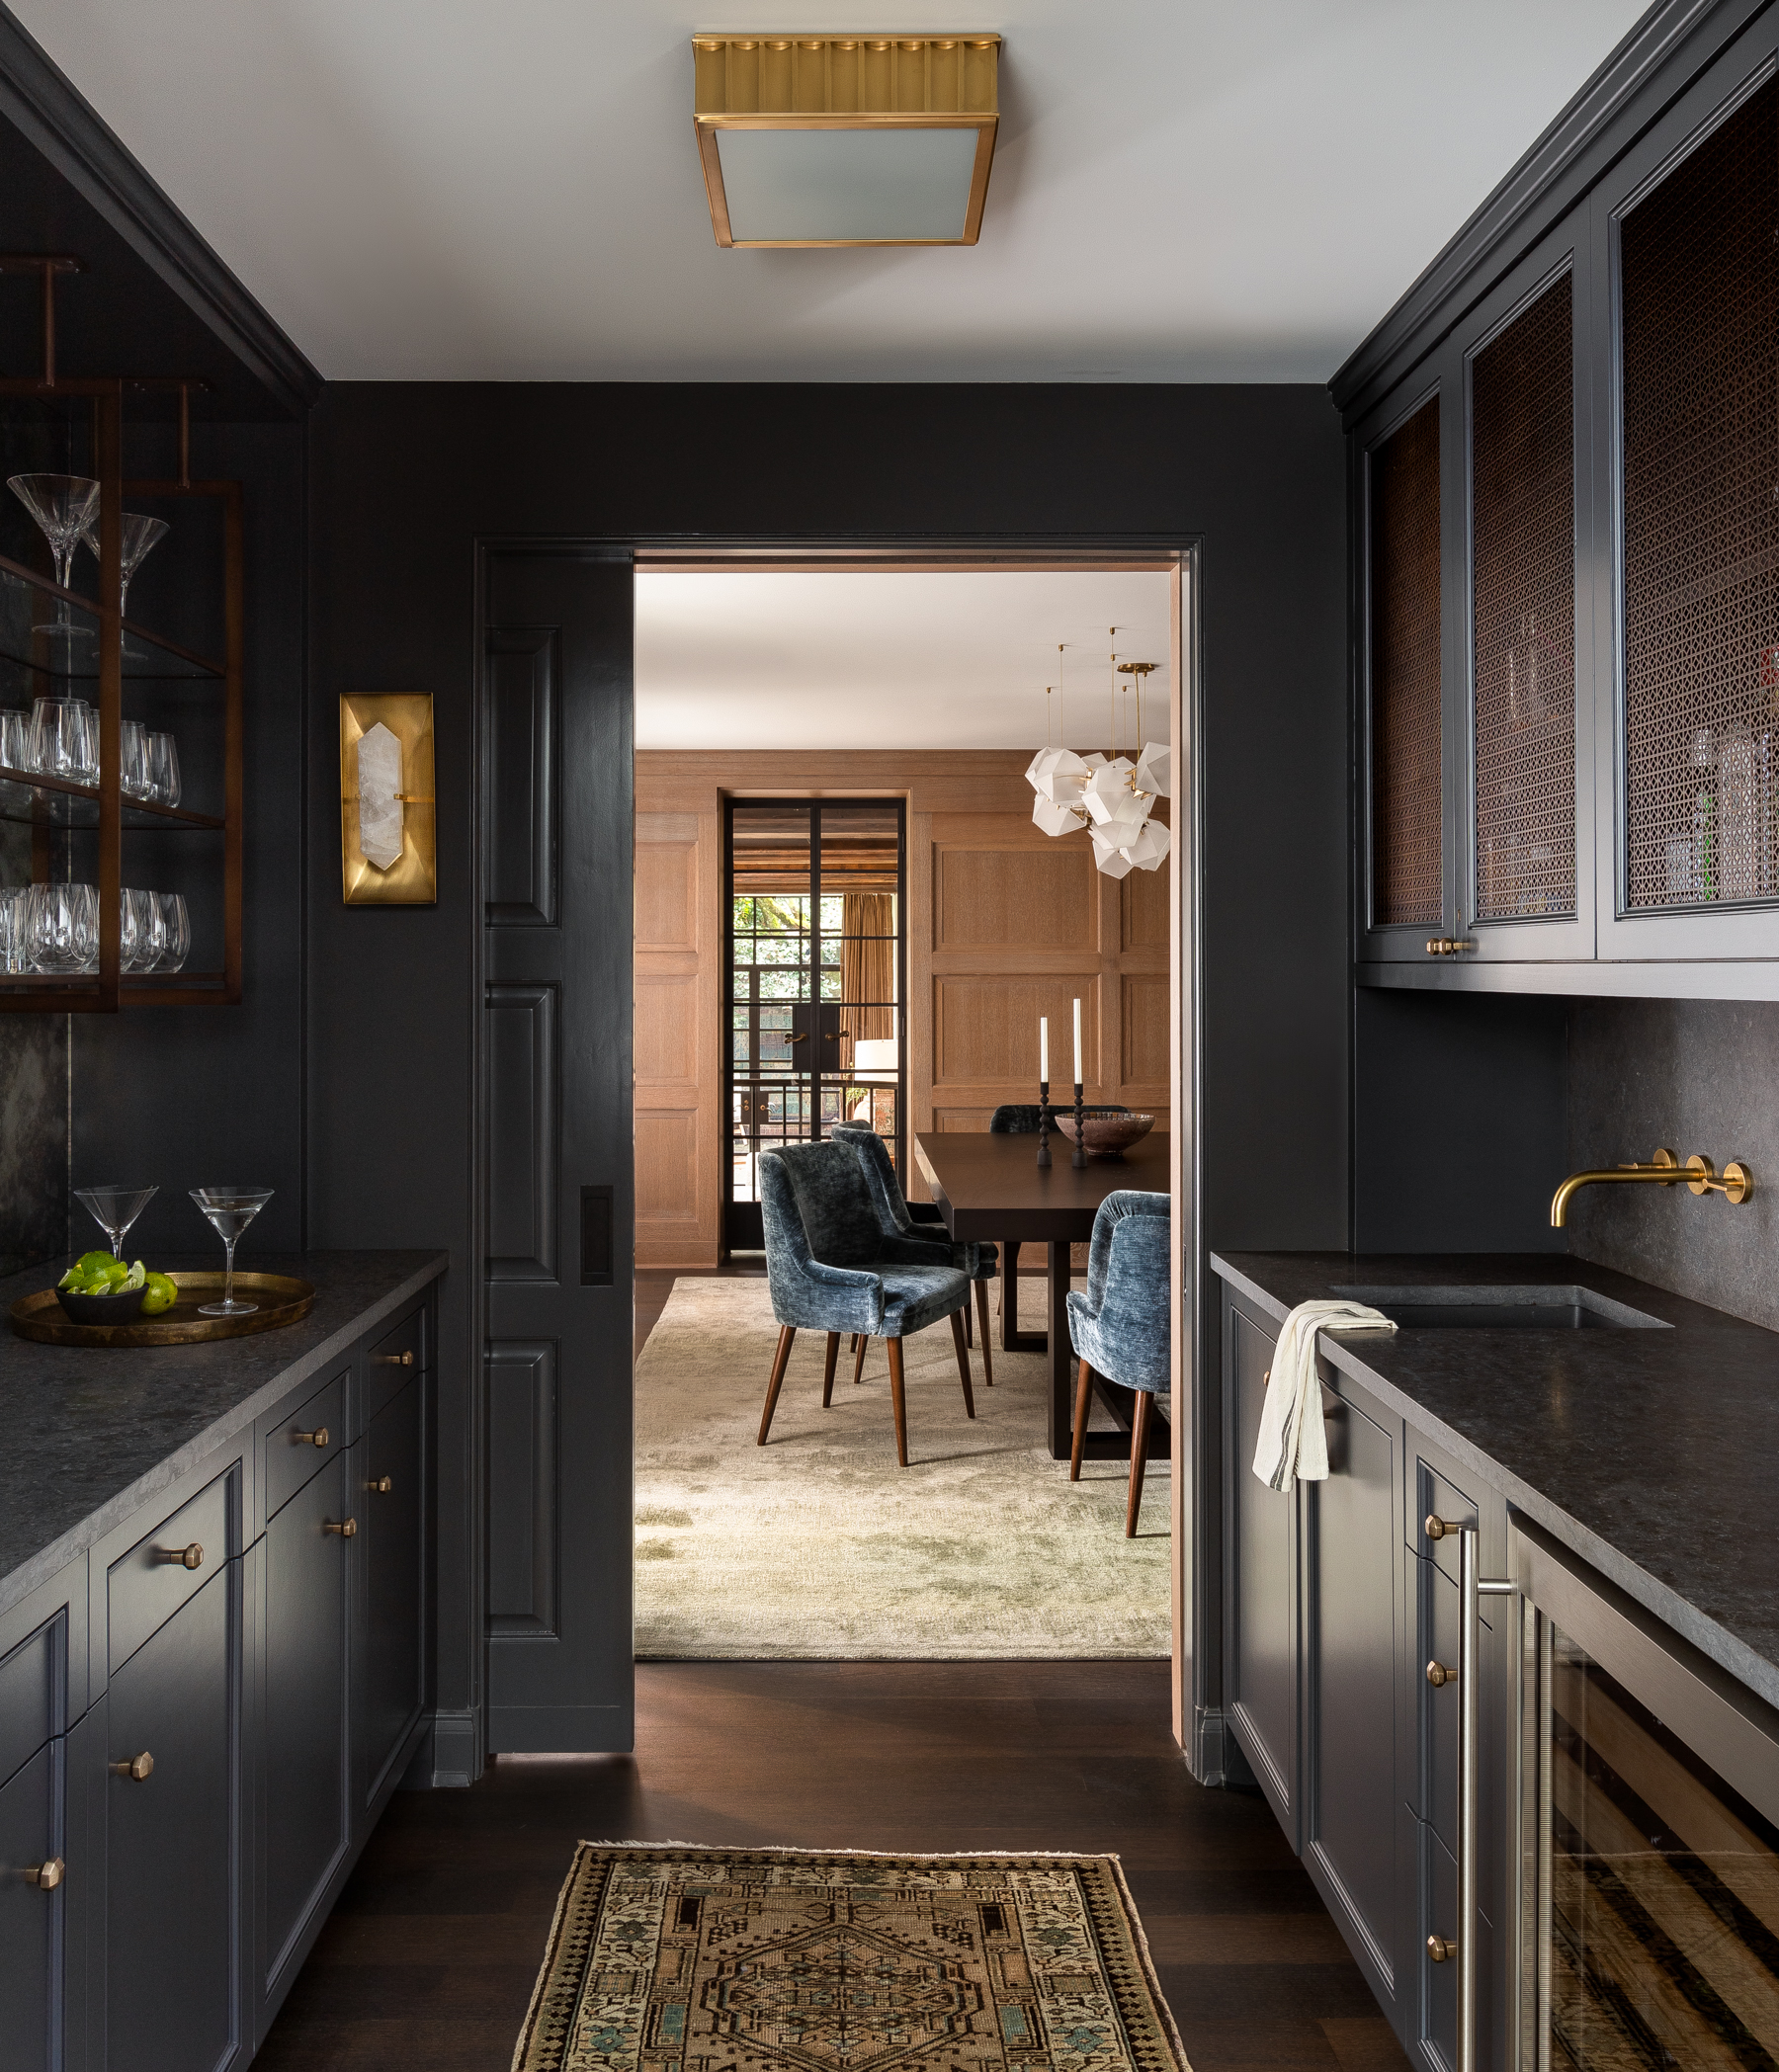 Butler's pantry with cool dark gray paint, dark textured marble countertops, brass hardware and fixtures, statement lighting, and an antique mirror backsplash.